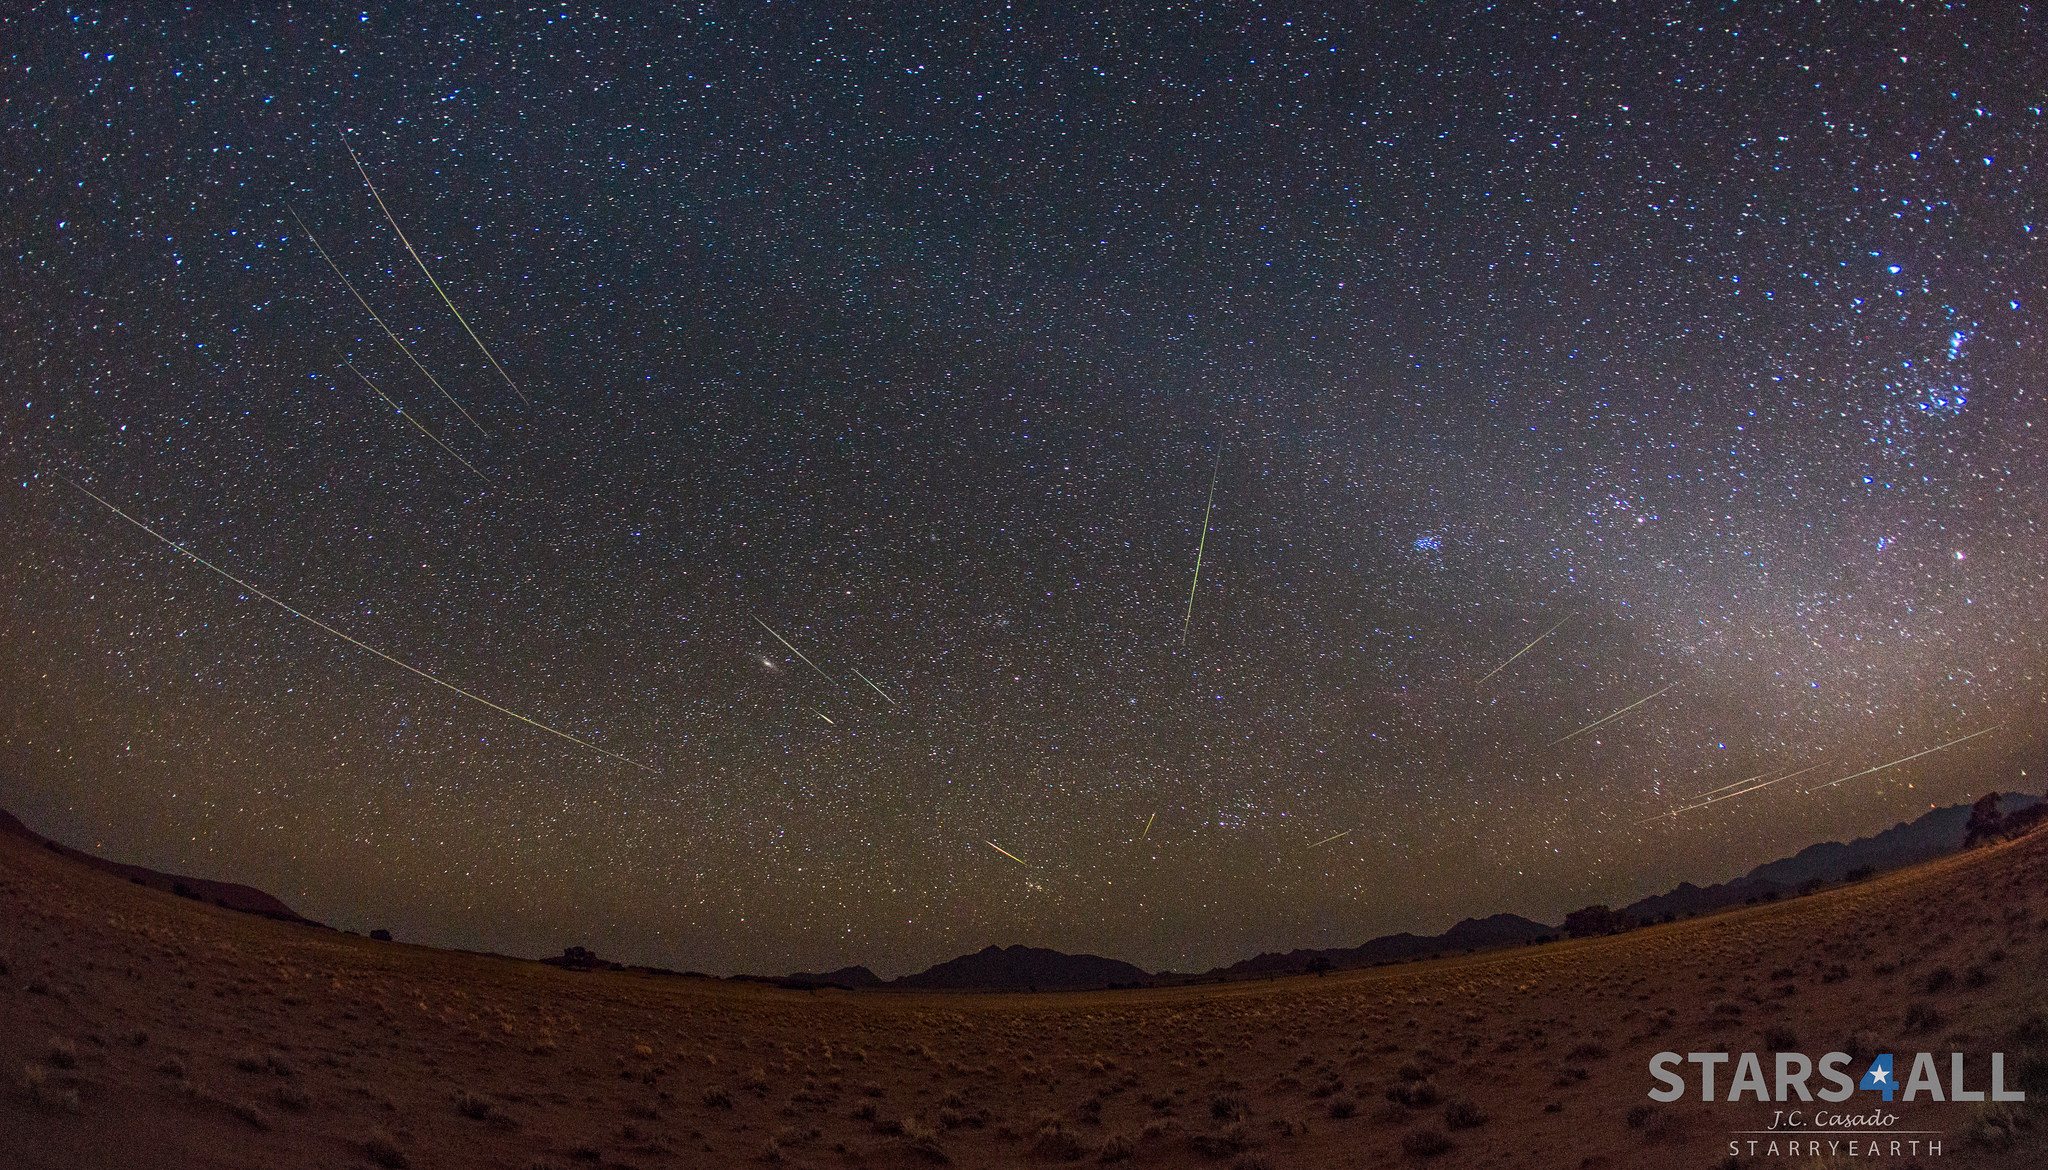 Composite of Perseids meteors shower during the night of 11 August 2016 (01:10 UT - 04:25 UT) from Sesriem, Namibia. At right is visible the zodiacal light and the bridge light to the upper left corner.